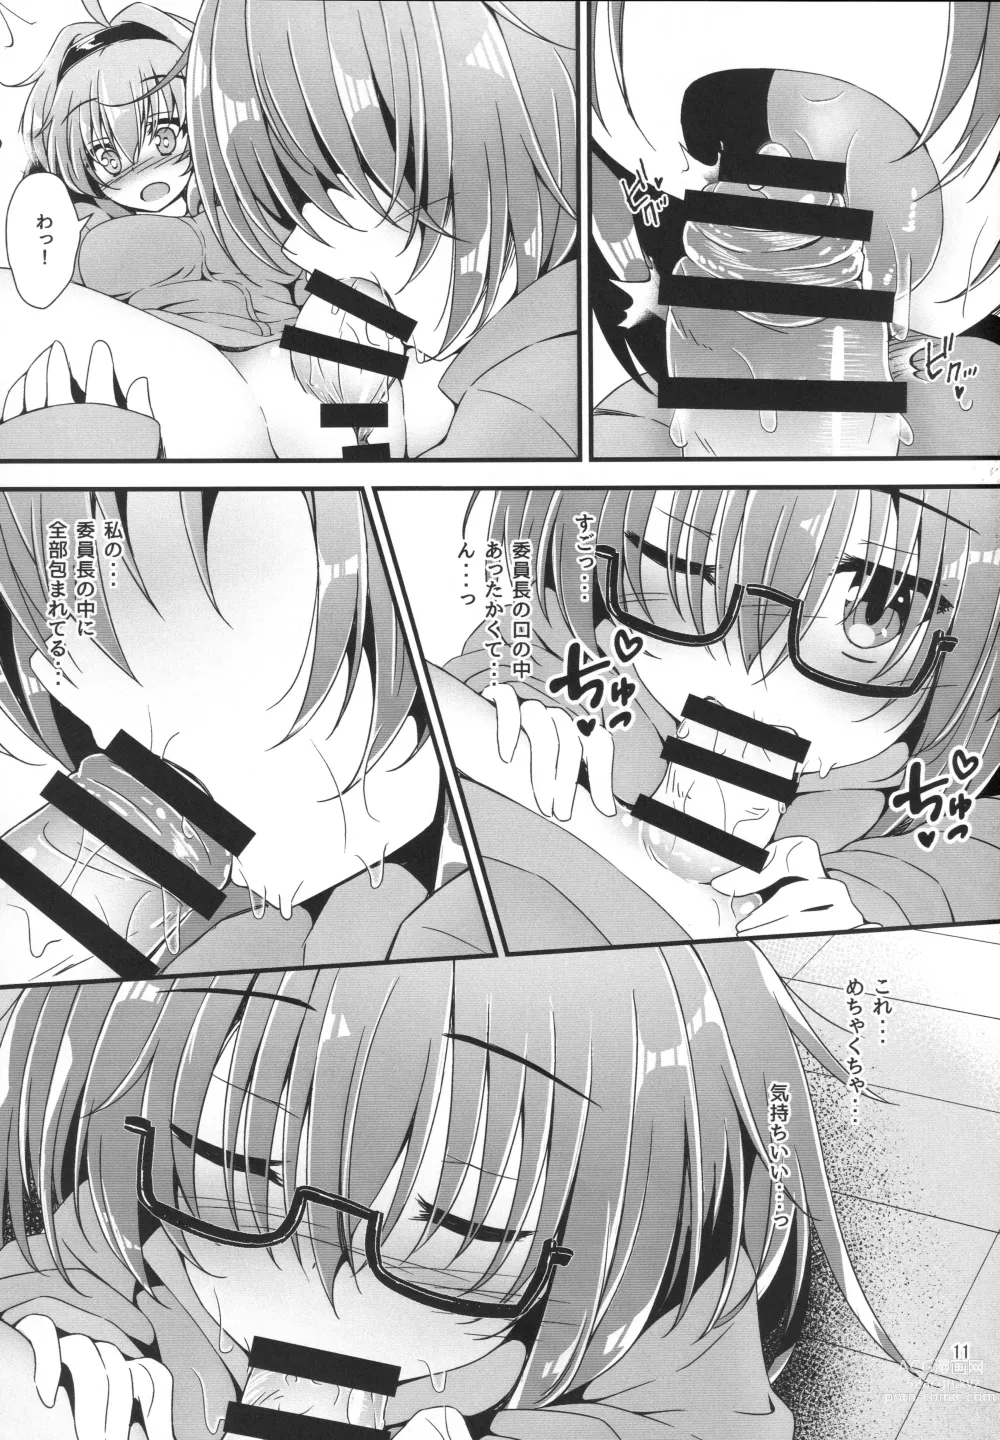 Page 10 of doujinshi Eny Dou Roulette Project Vol. 1